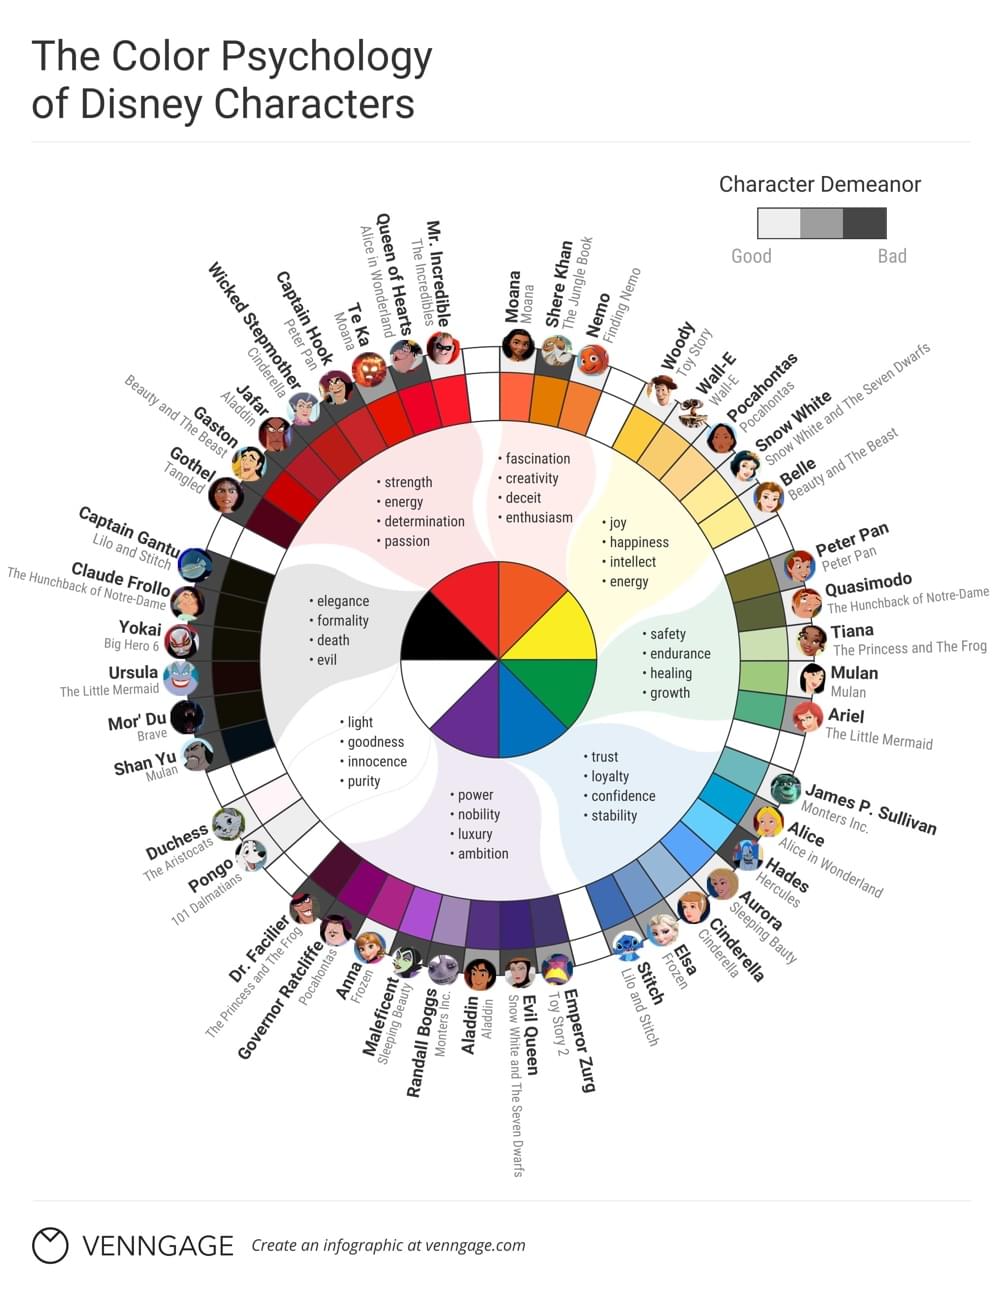 Disney heroes and villains color wheel infographic